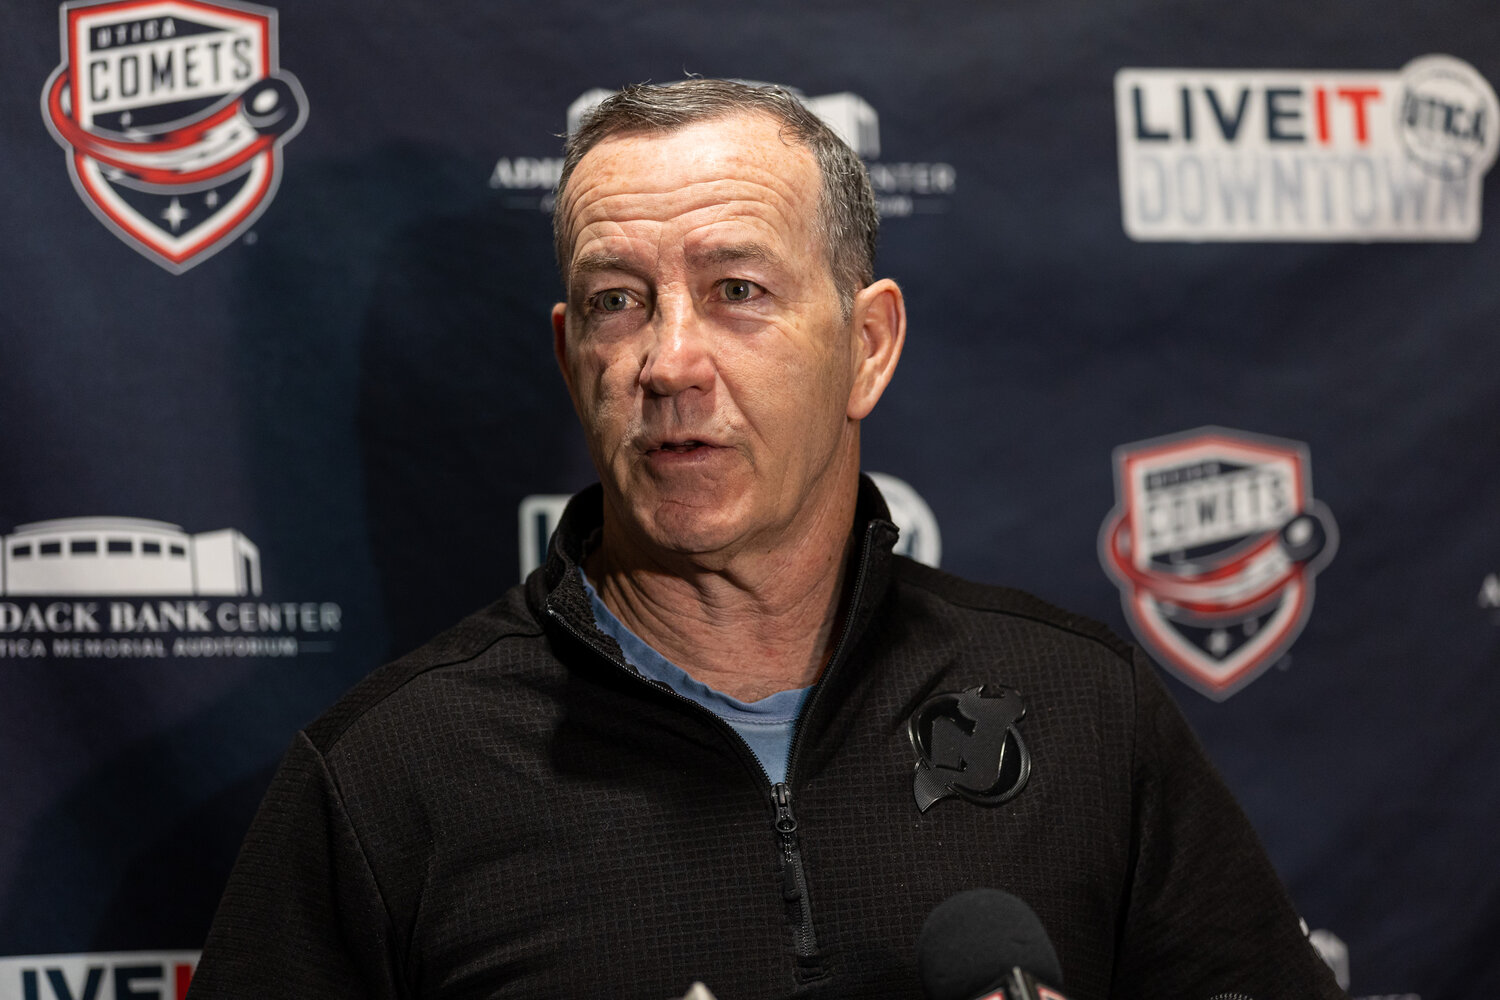 Utica Comets coach Kevin Dineen has helped guide the team to back-to-back appearances in the AHL North Division semifinals. He said there’s “unfinished business” for next season.